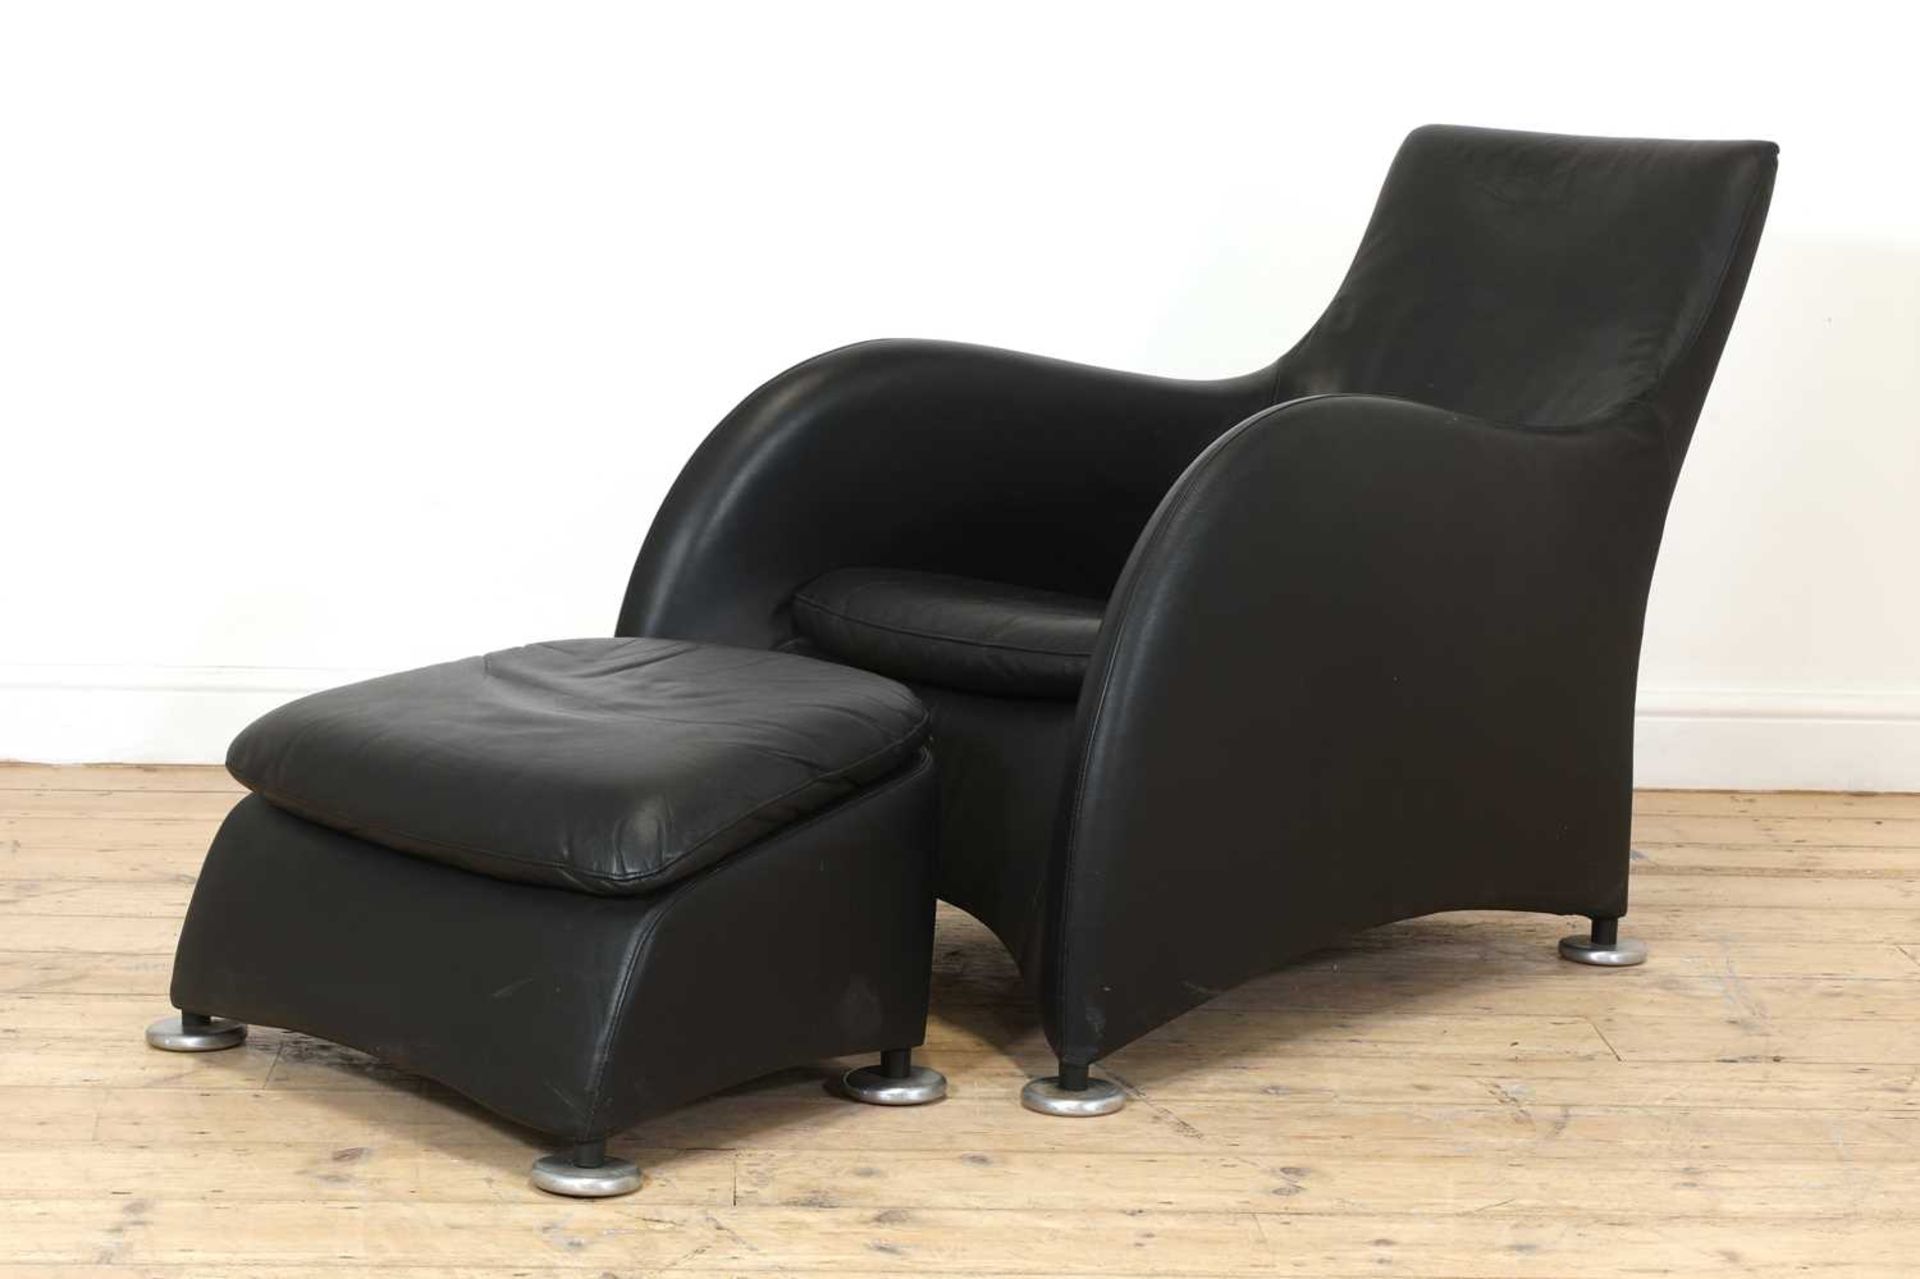 A leather lounger and ottoman, - Bild 3 aus 10